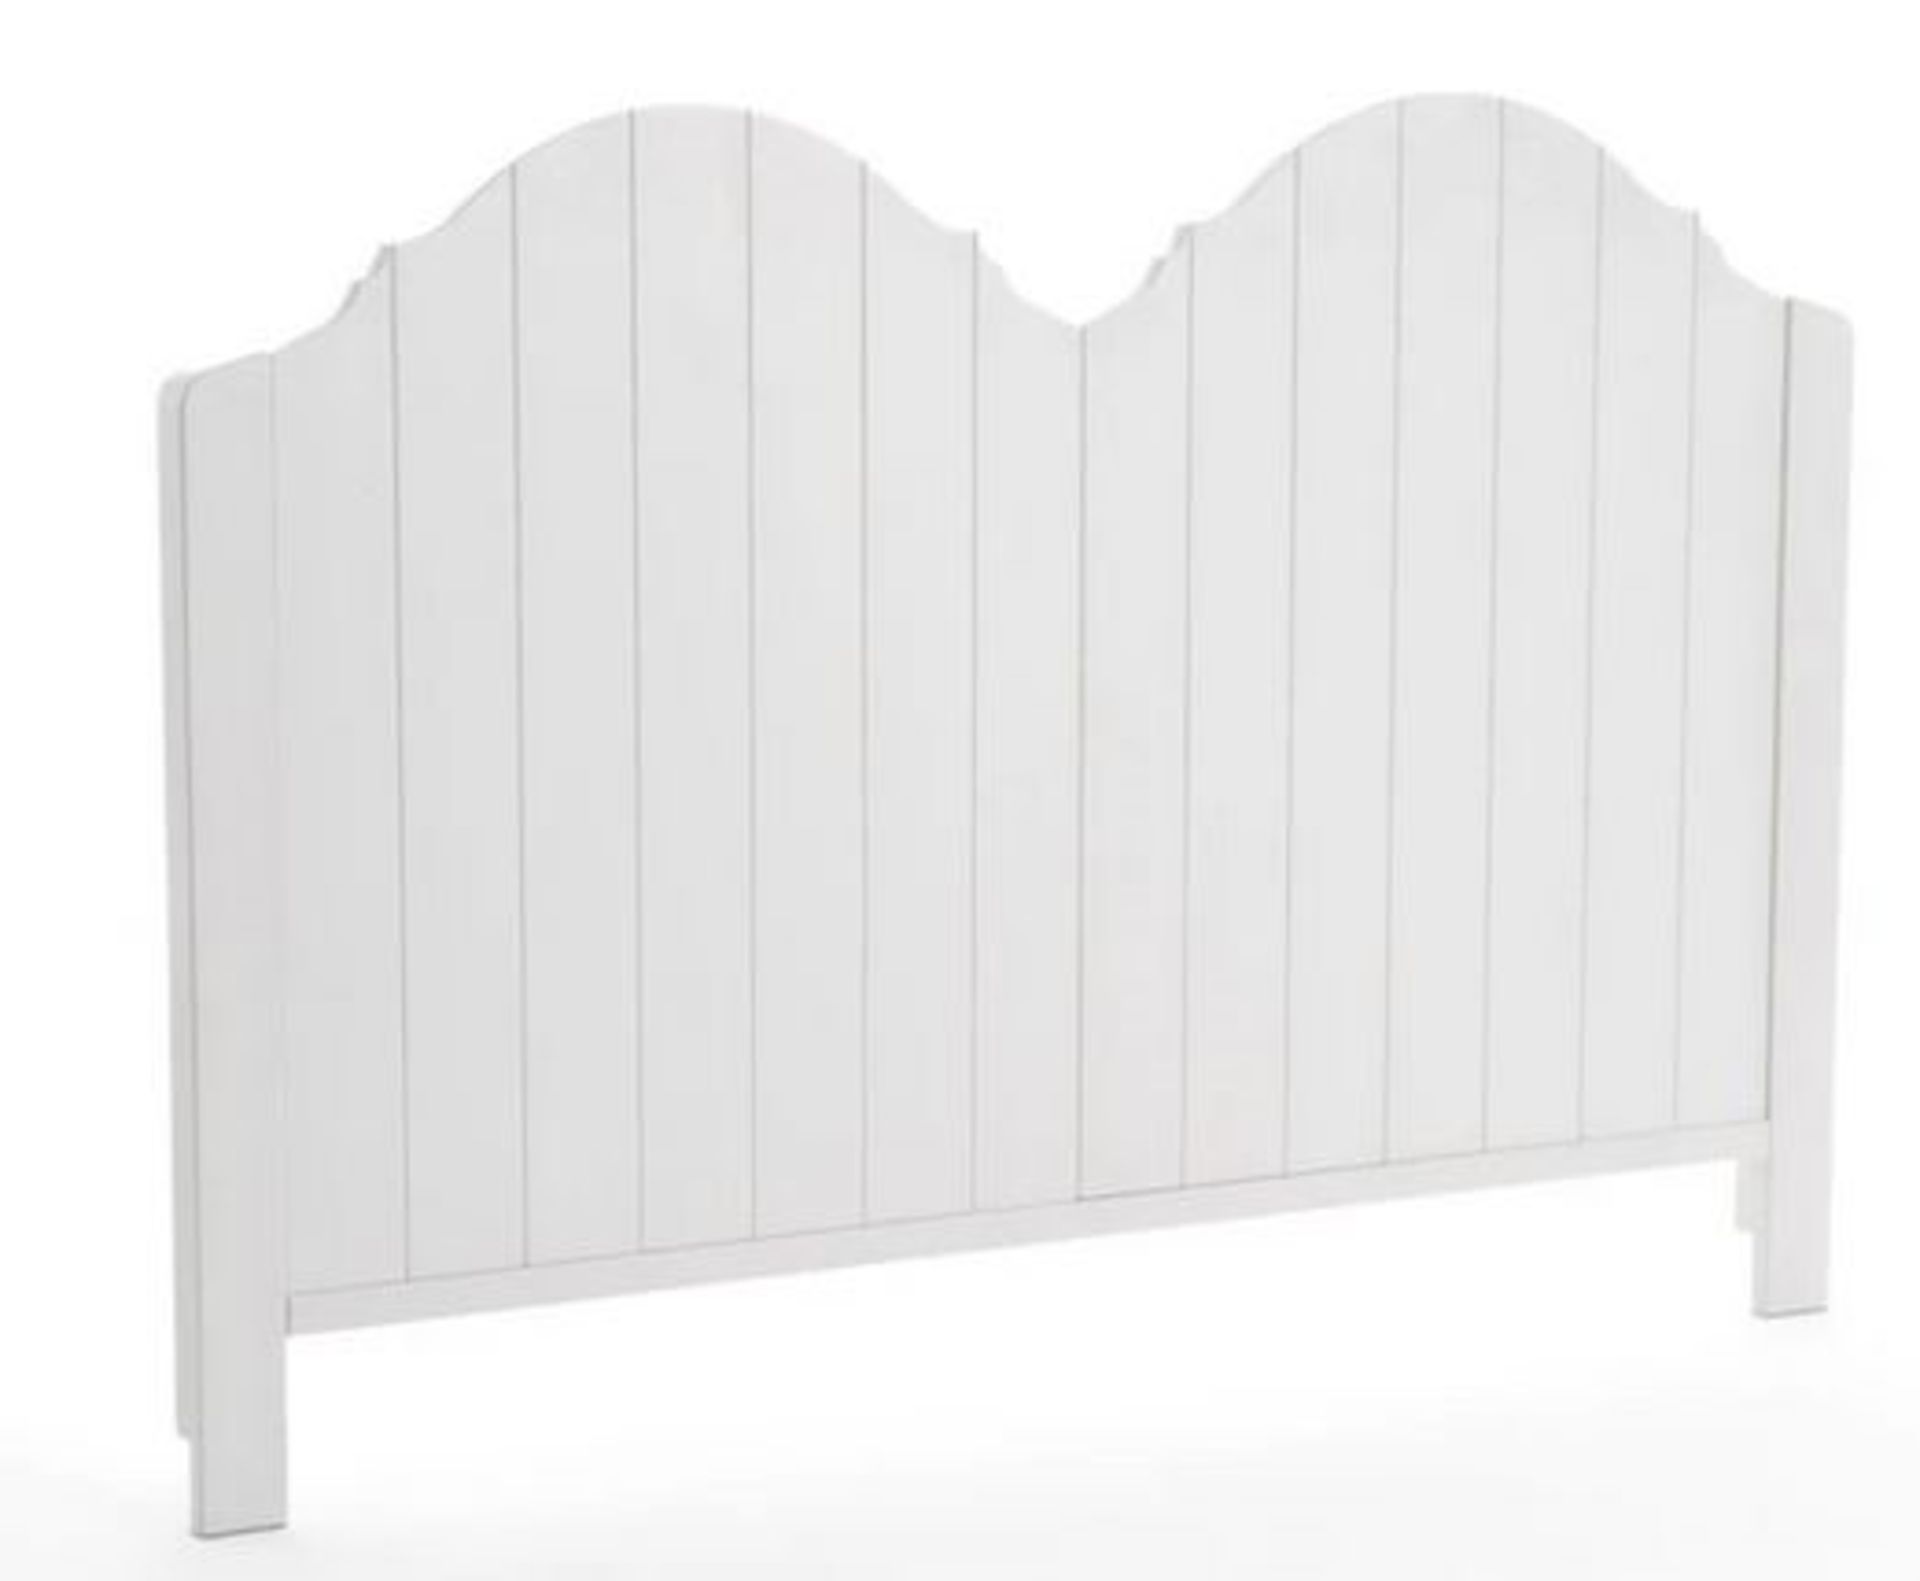 1 GRADE A BOXED DESIGNER PINE HEADBOARD IN WHITE / RRP £215.00 (PUBLIC VIEWING AVAILABLE)